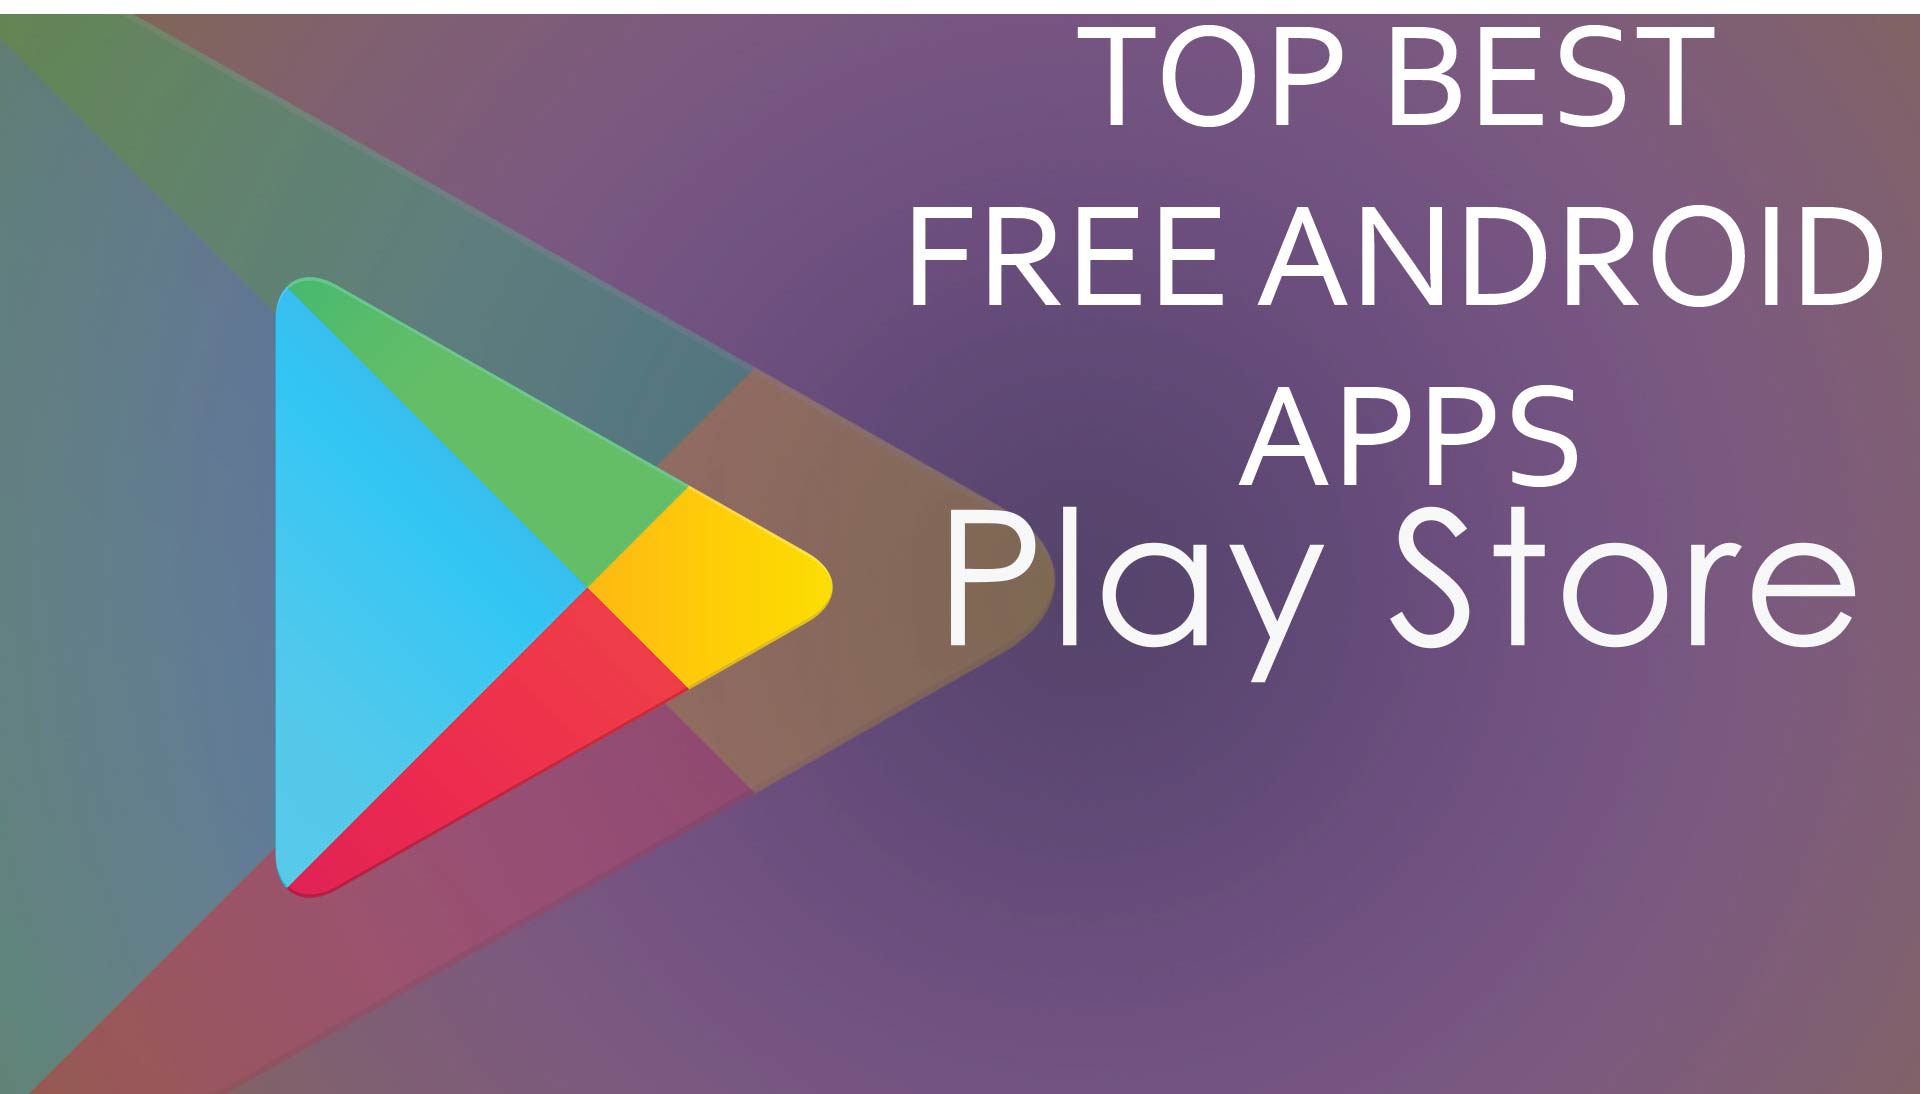 Top Best Free Android Apps Available Right Now March 2020 1 Gsm